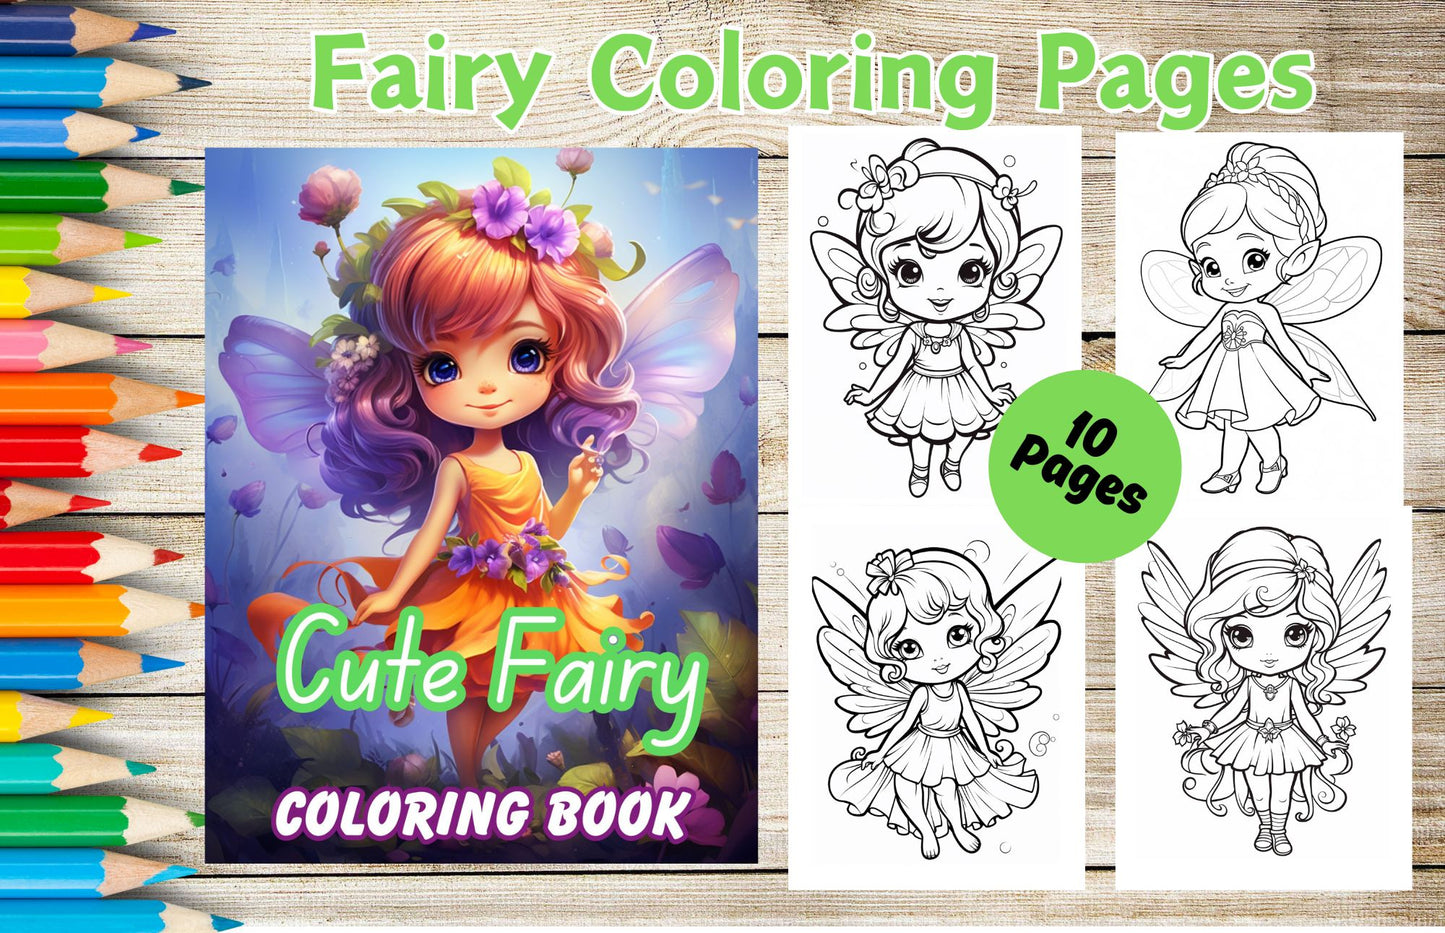 Fairy Princess Coloring Pages- Instant Digital Download